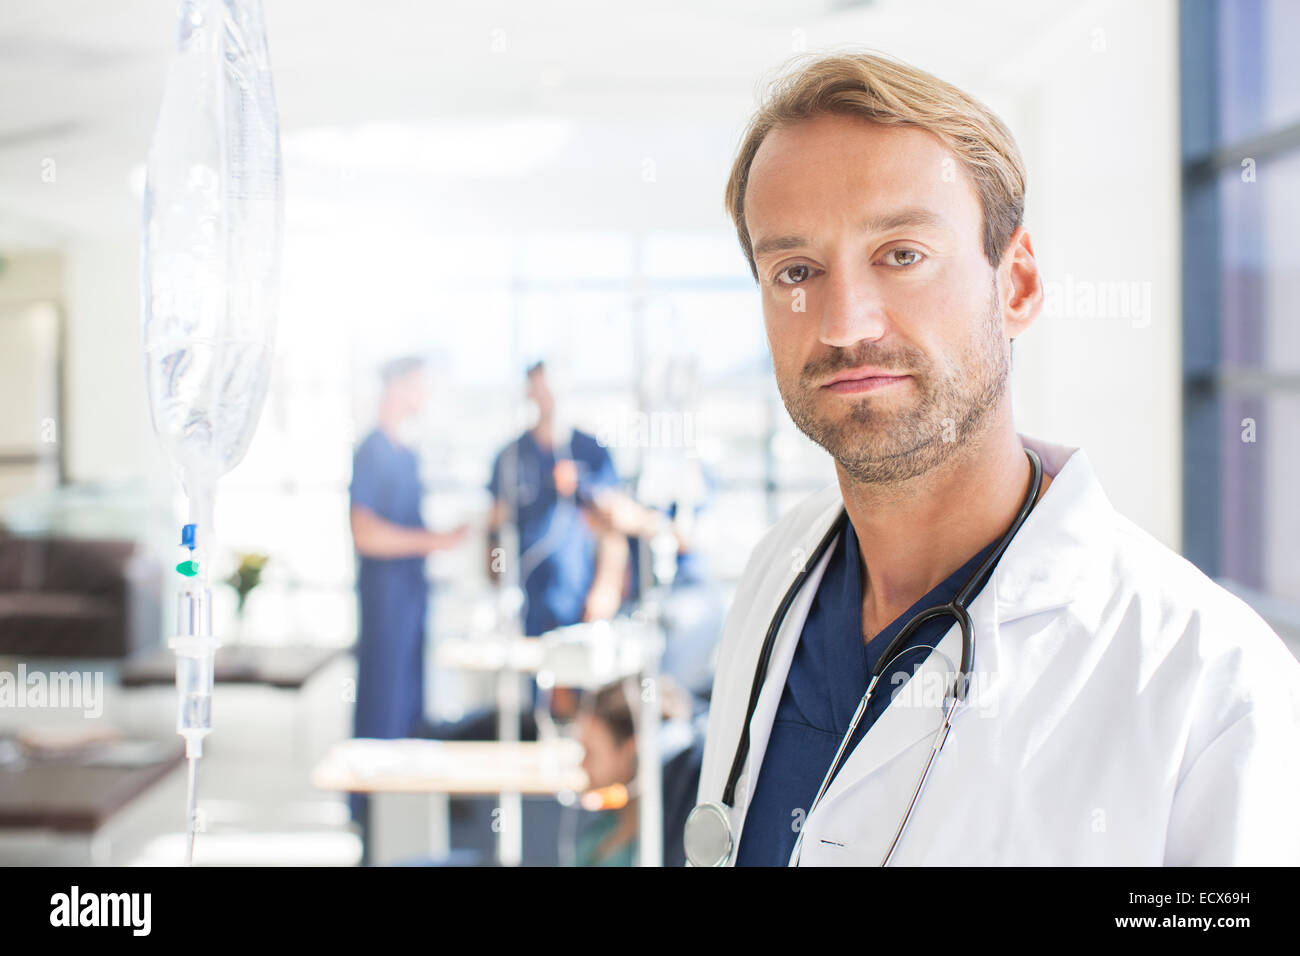 Portrait of mid adult doctor with colleagues in background, standing in hospital ward Stock Photo